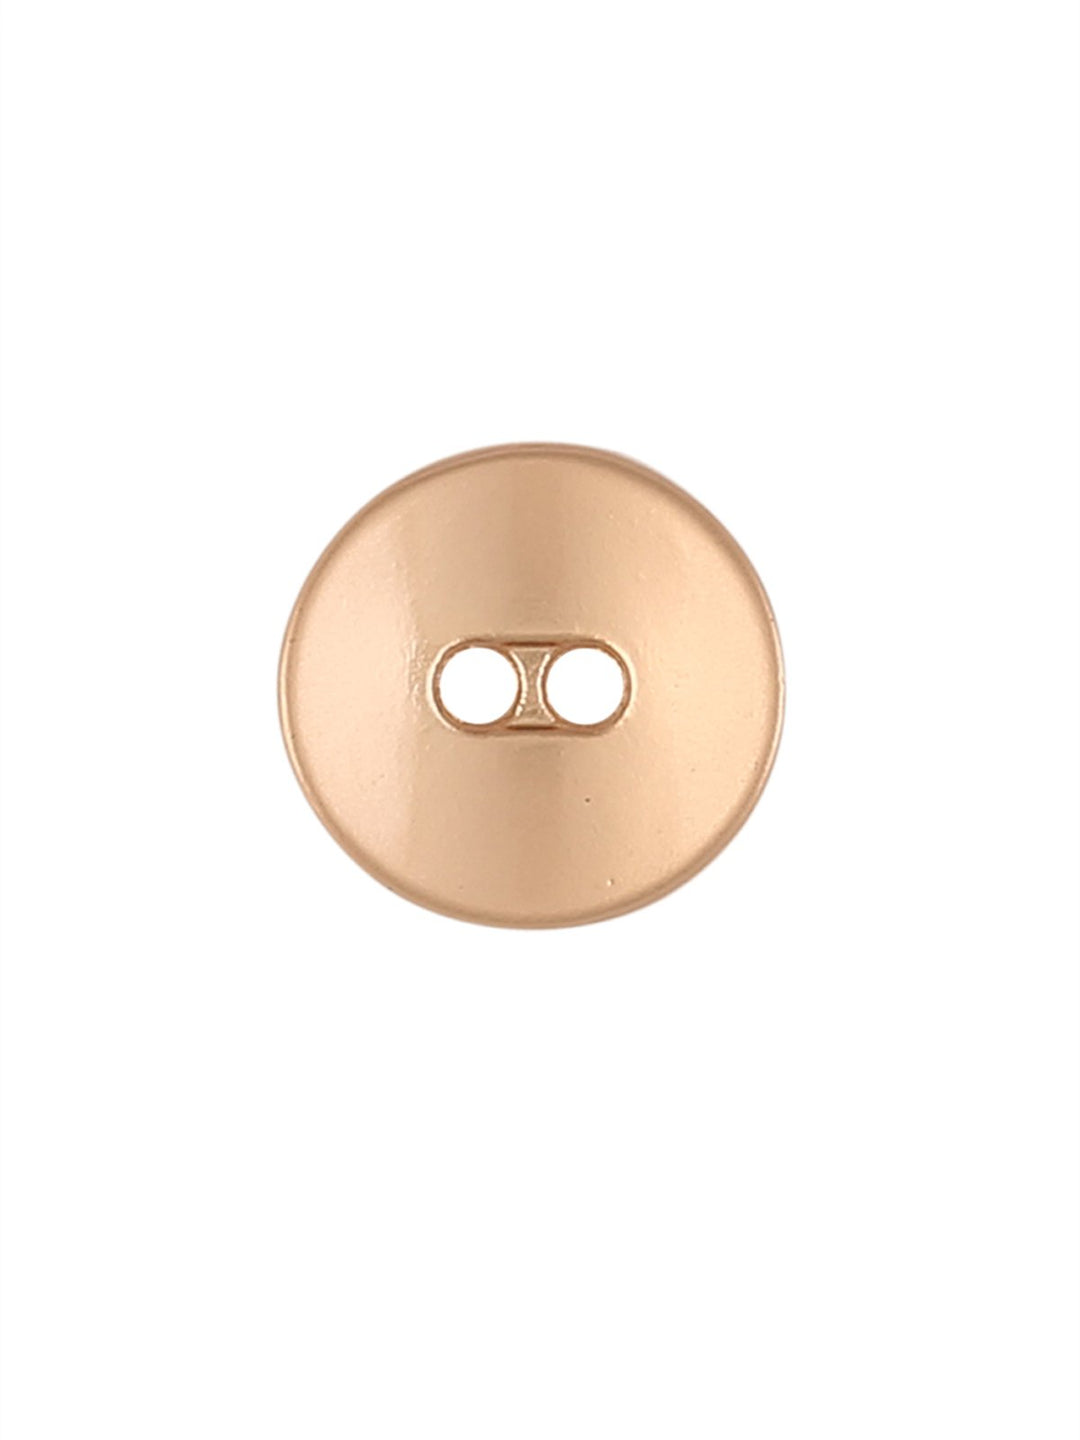 Fashionable Round Shape with Curvy Structure Metal Button in Matte Gold Color